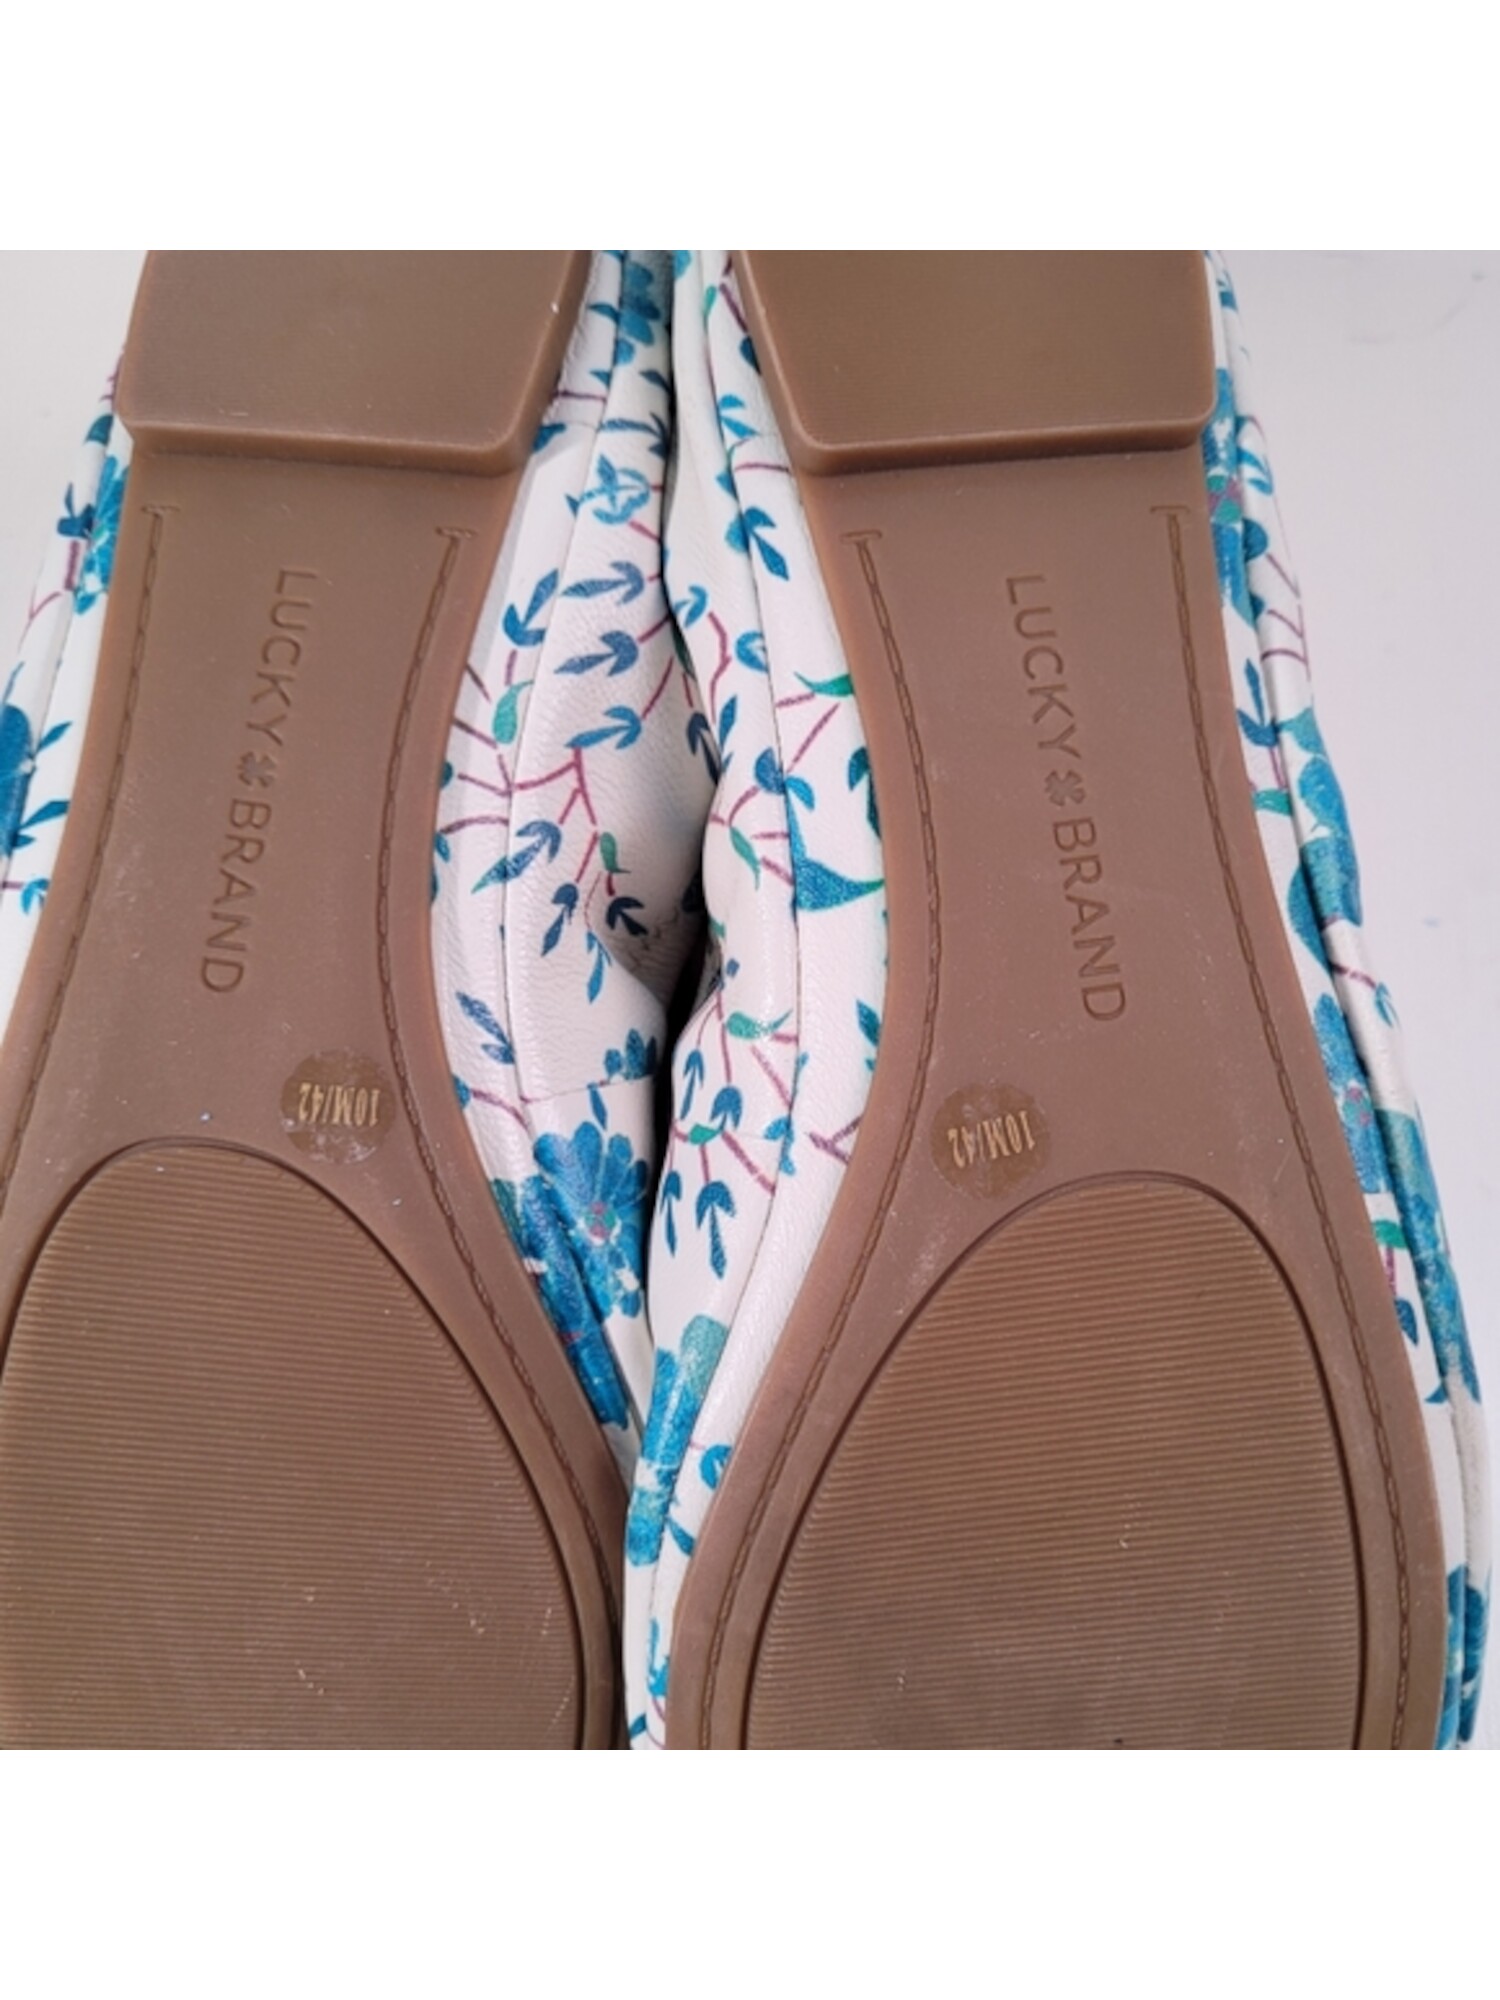 LUCKY BRAND Womens White Floral Cushioned Stretch Emmie Round Toe Slip On Leather Ballet Flats 8.5 M